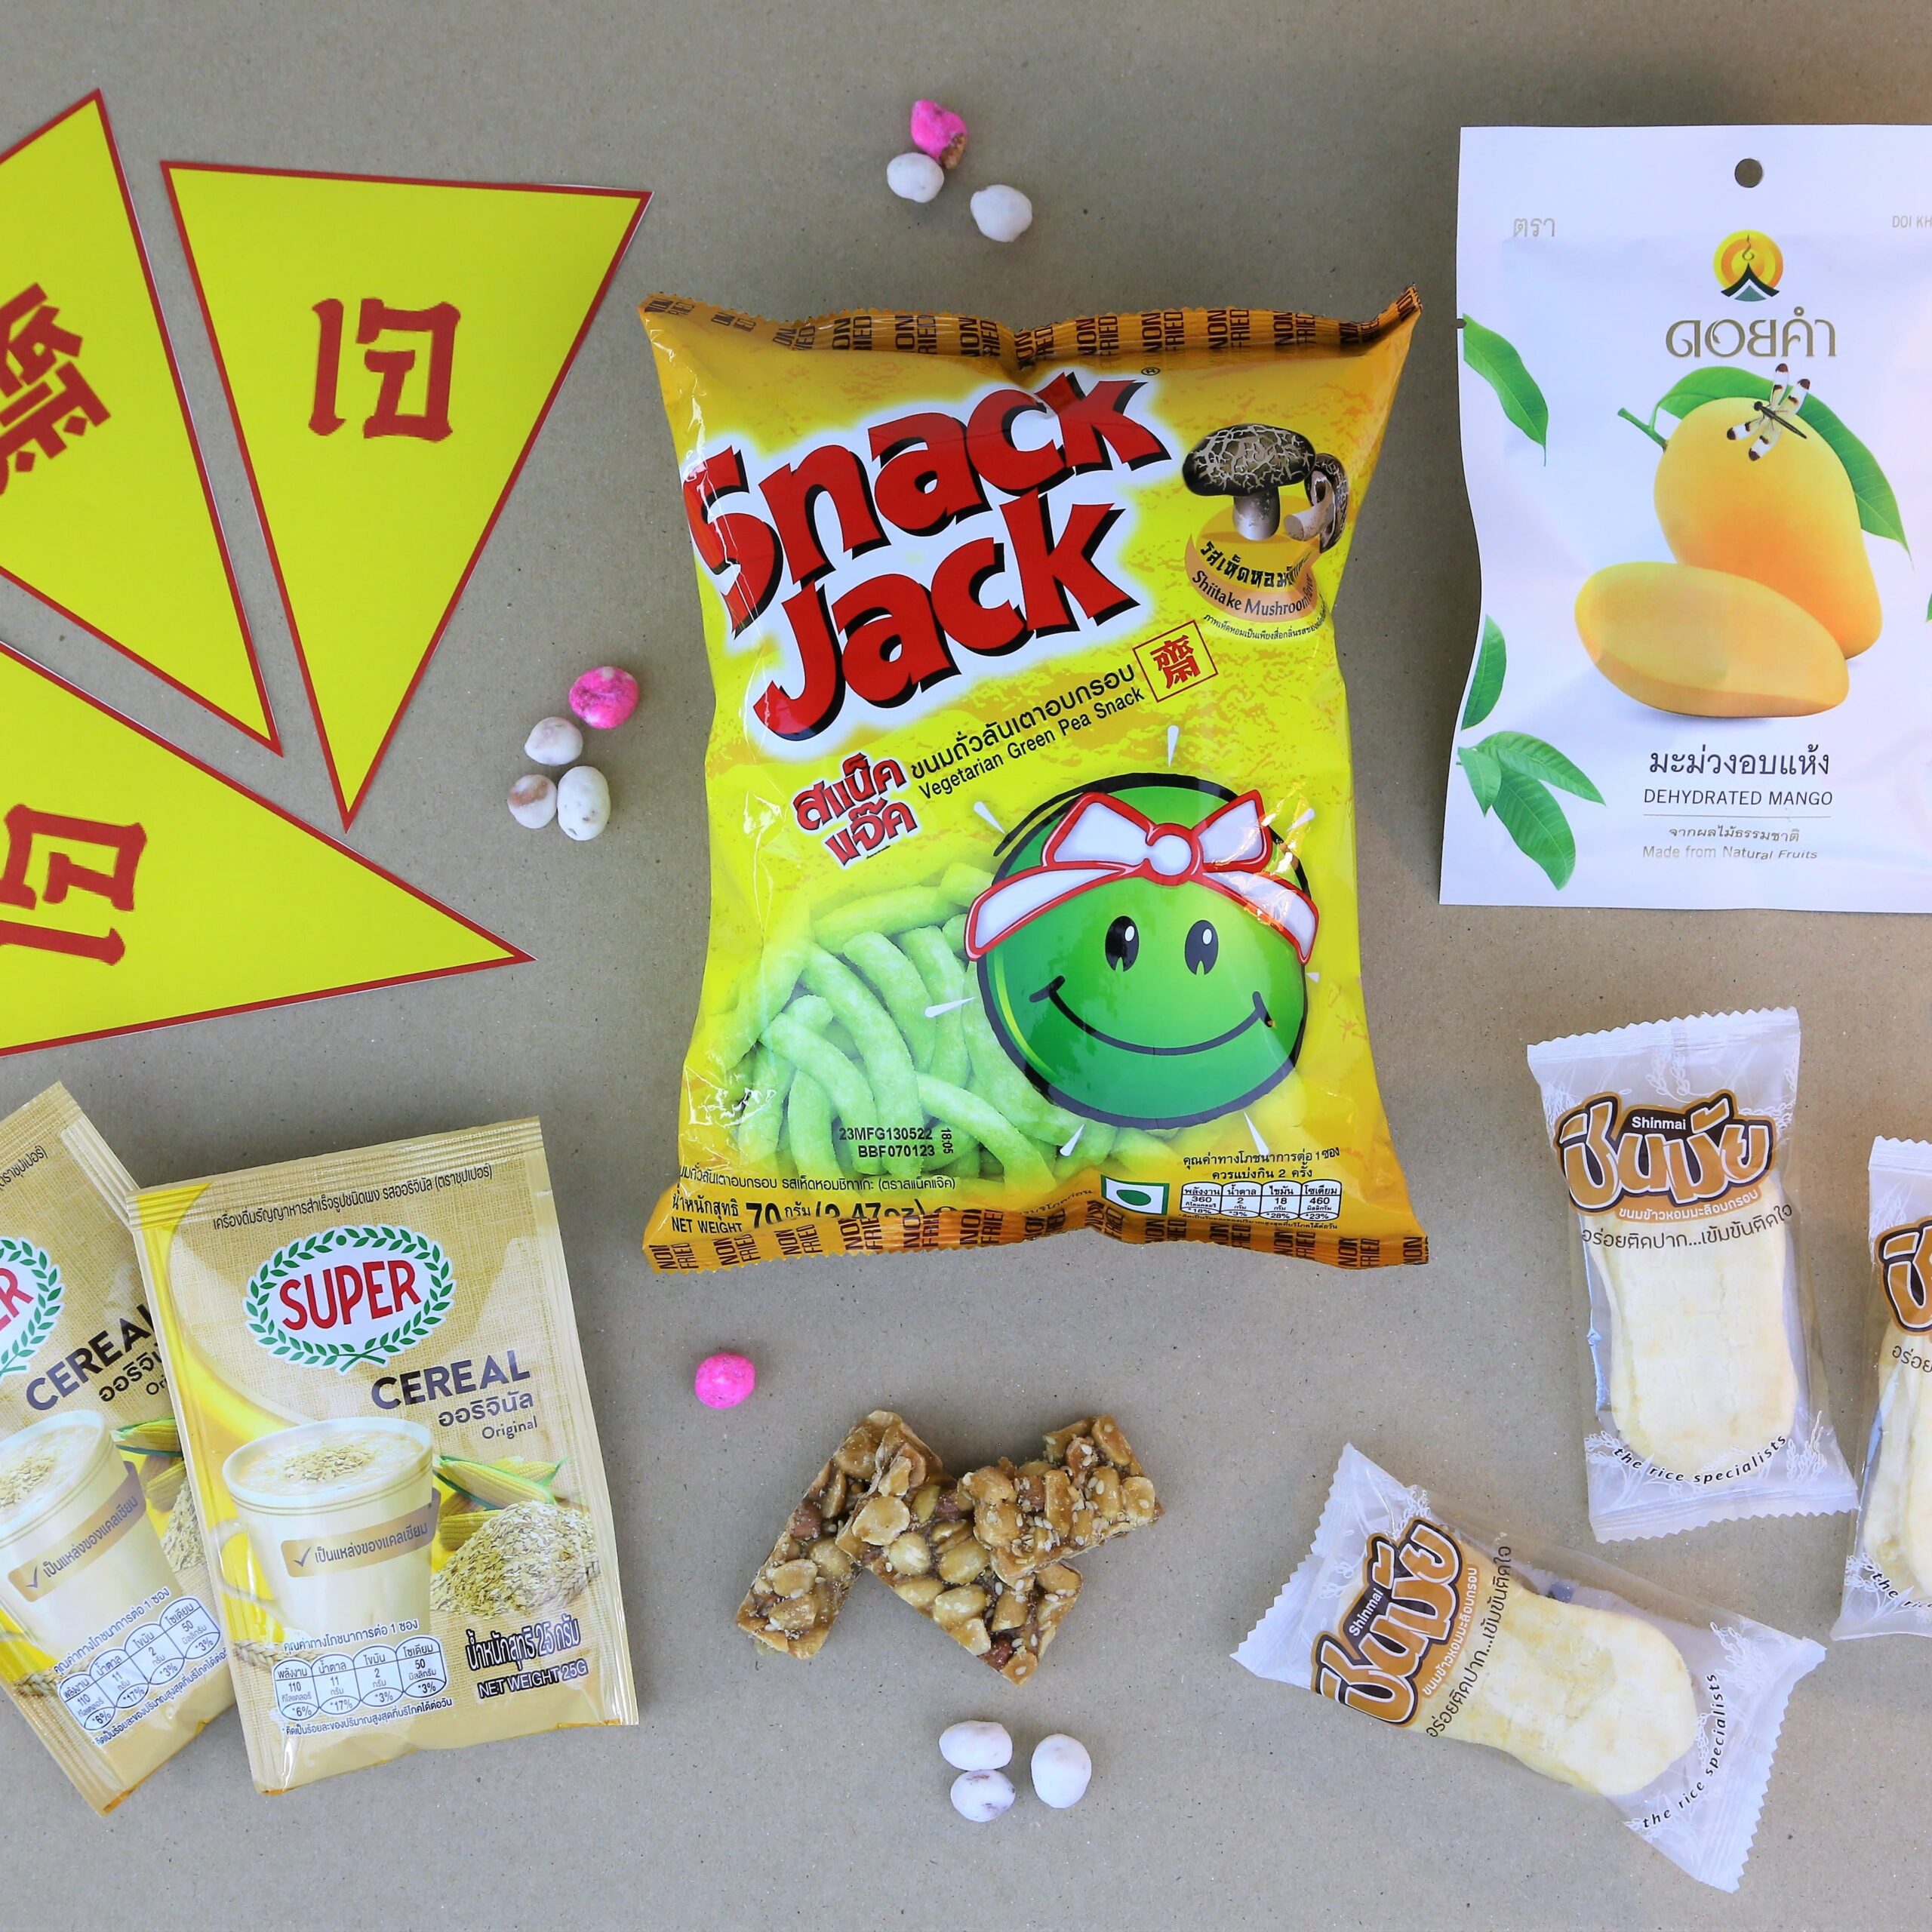 Vegan snack box consists of vegan Thai snacks such as dried mango and rice crackers